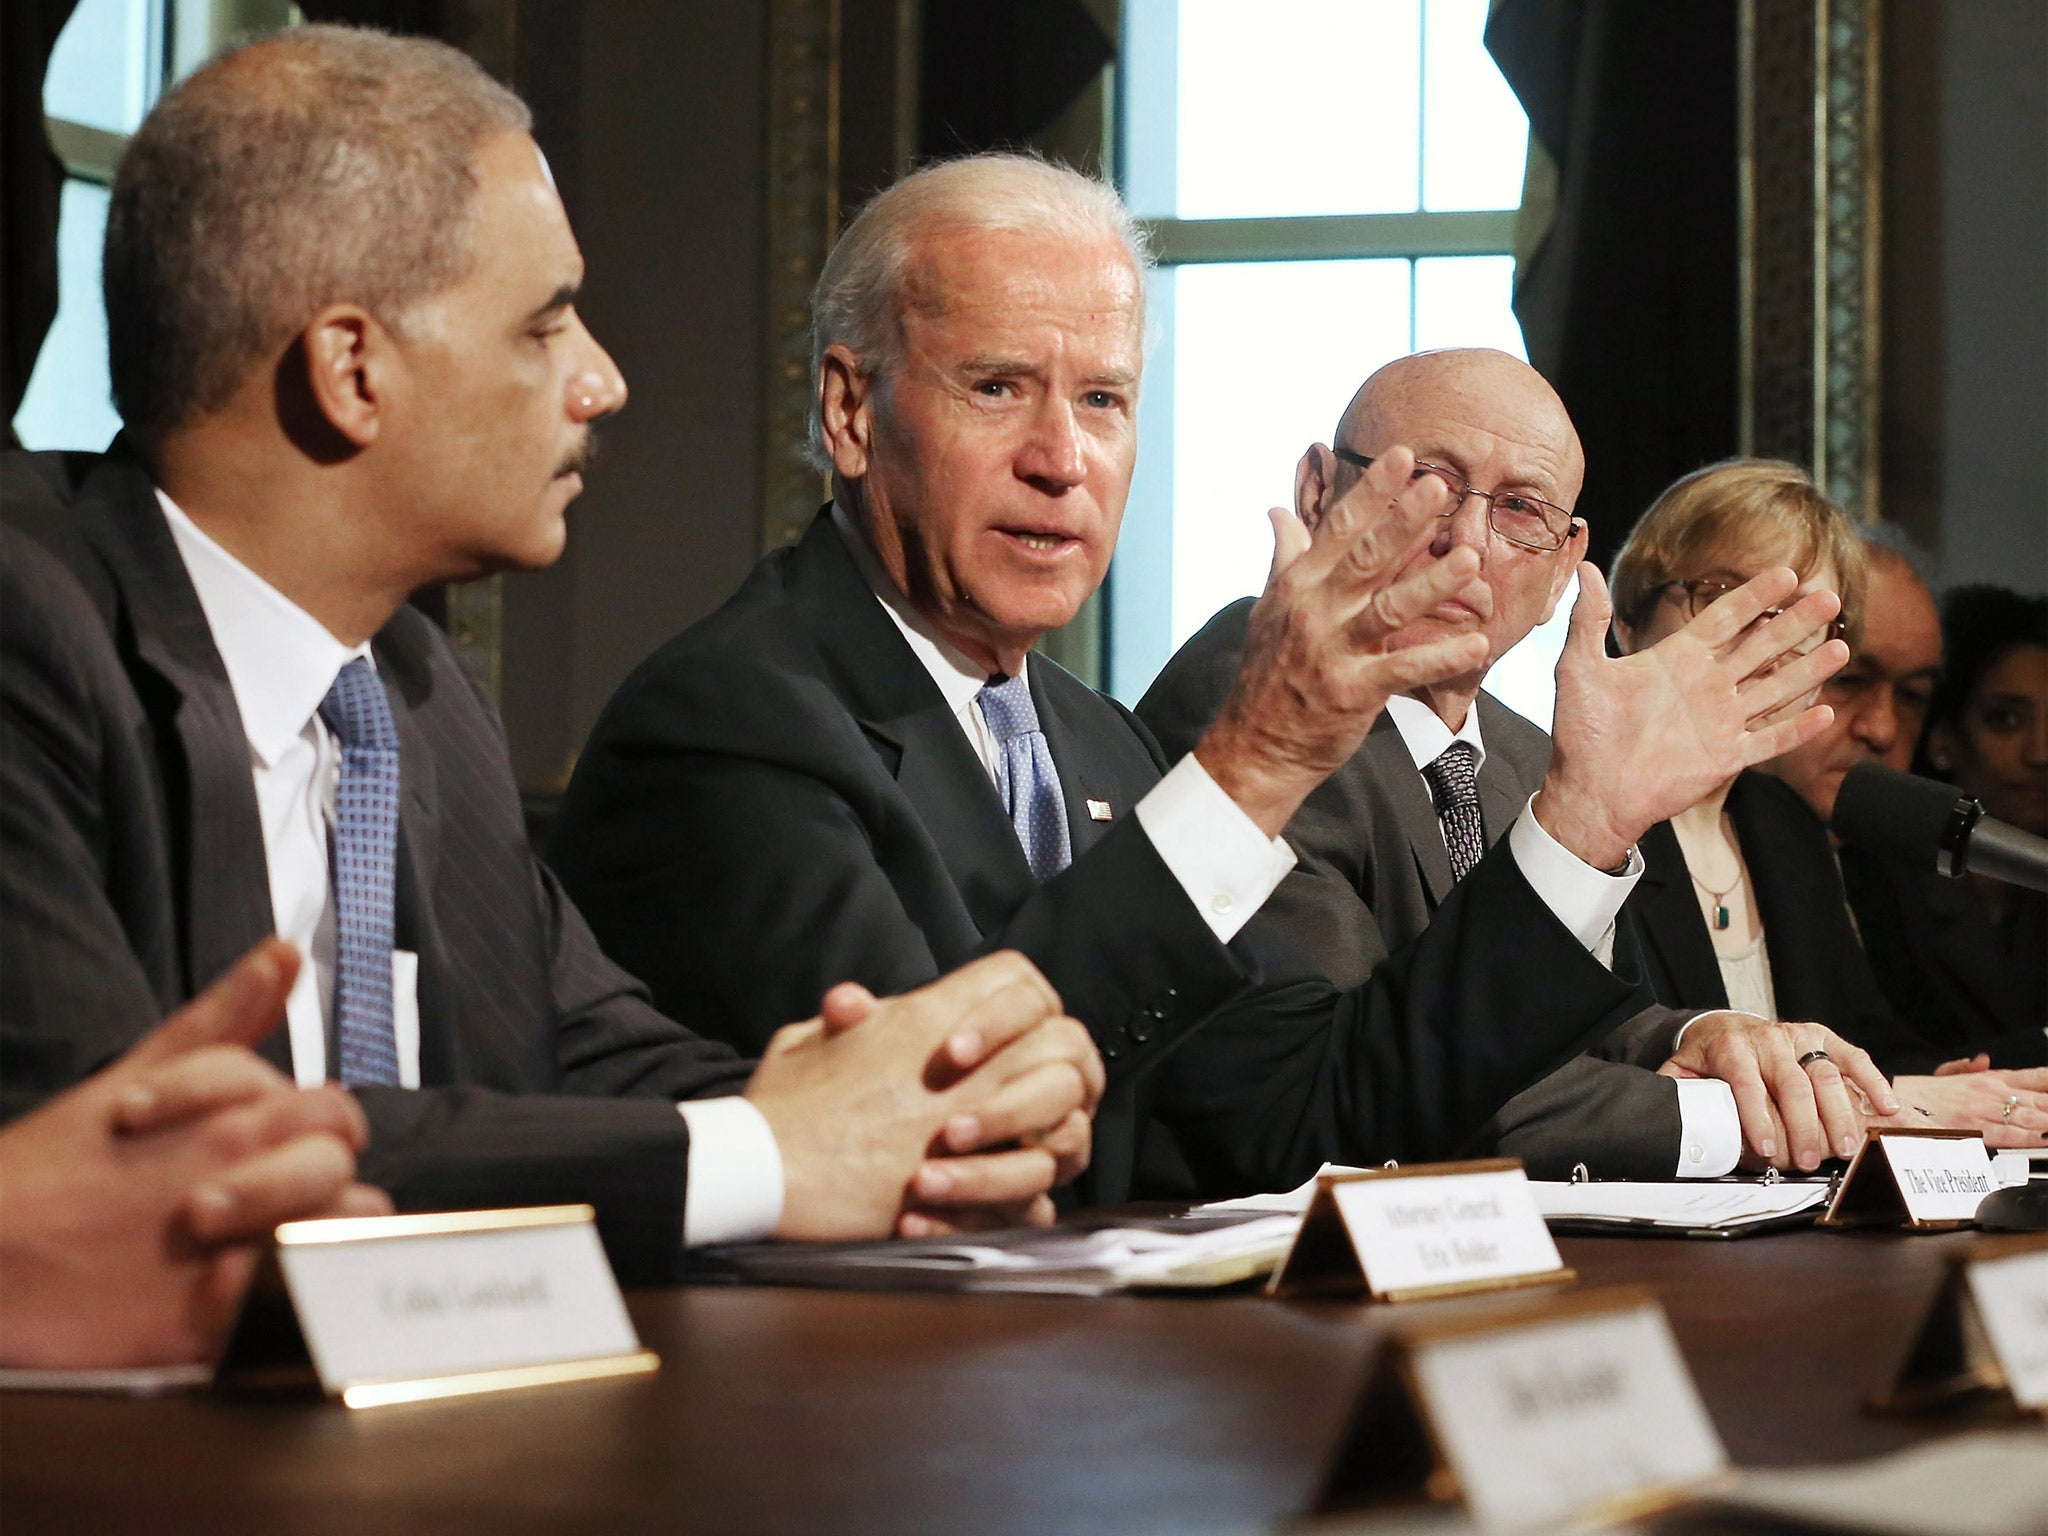 U.S. Vice President Joe Biden at a meeting with U.S. Attorney General Eric Holder (left) and gun safety advocacy groups